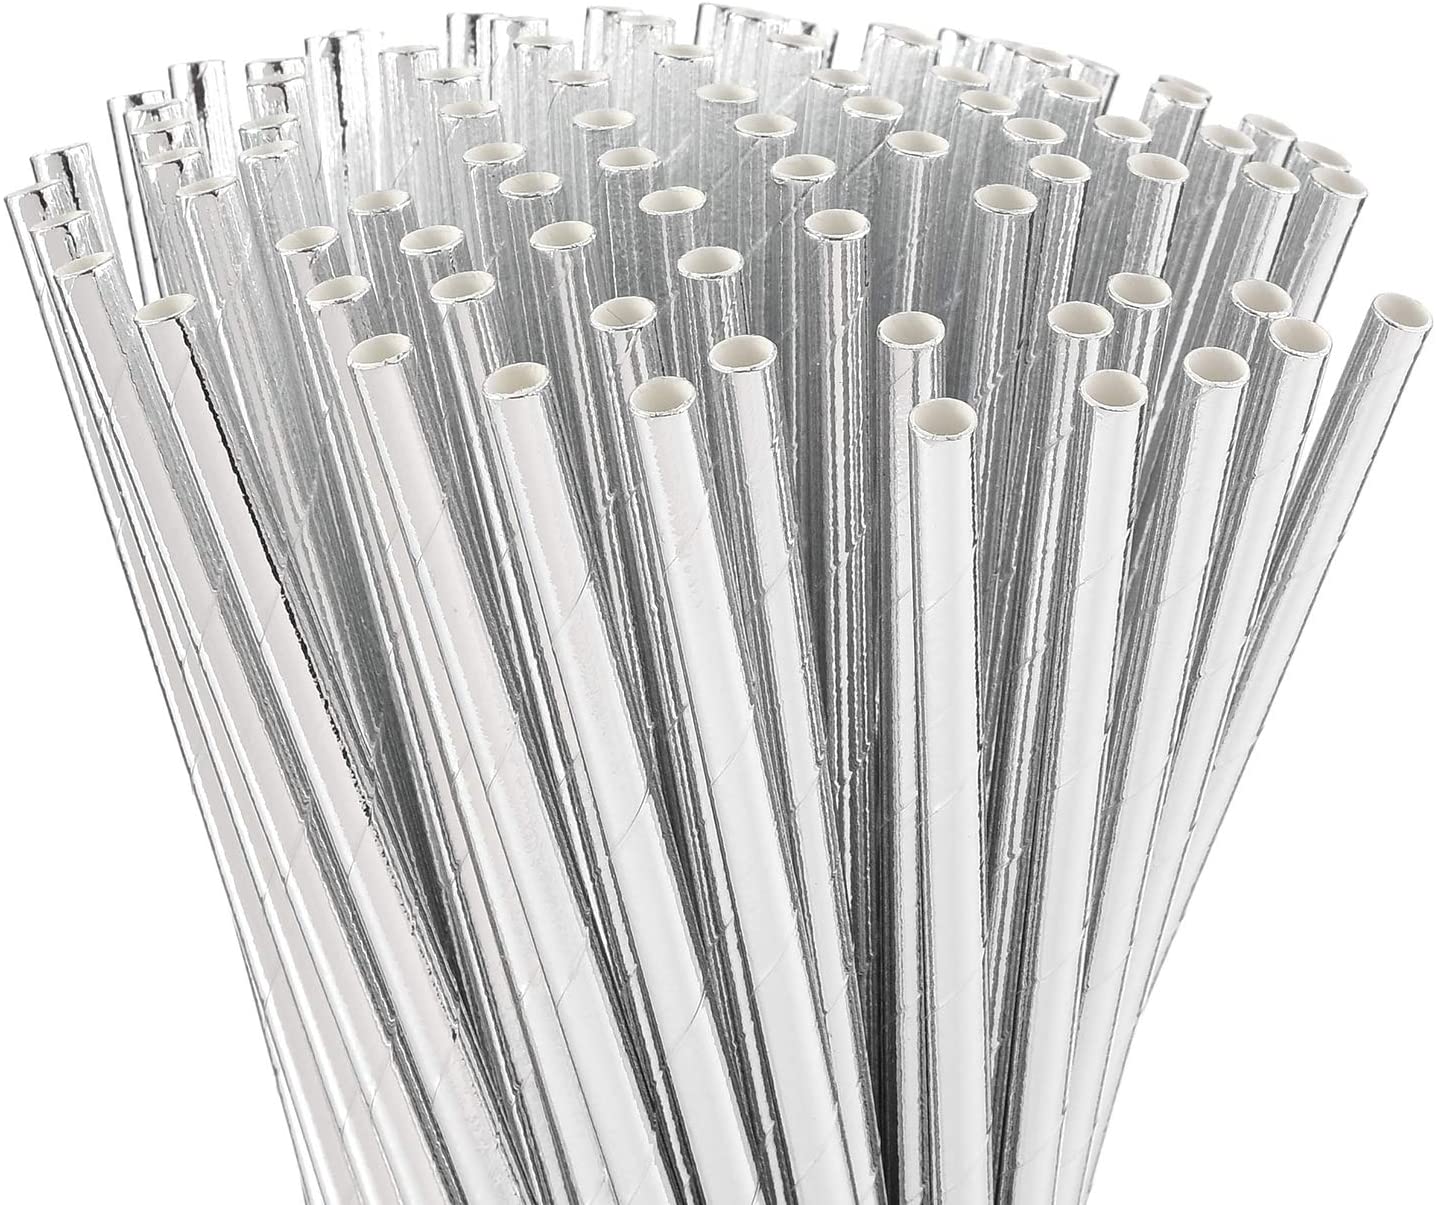 AUMA 100 paper straws, Silver Biodegradable Paper Straws for Juices, Shakes, Smoothies, Party Supplies Decorations - e4cents